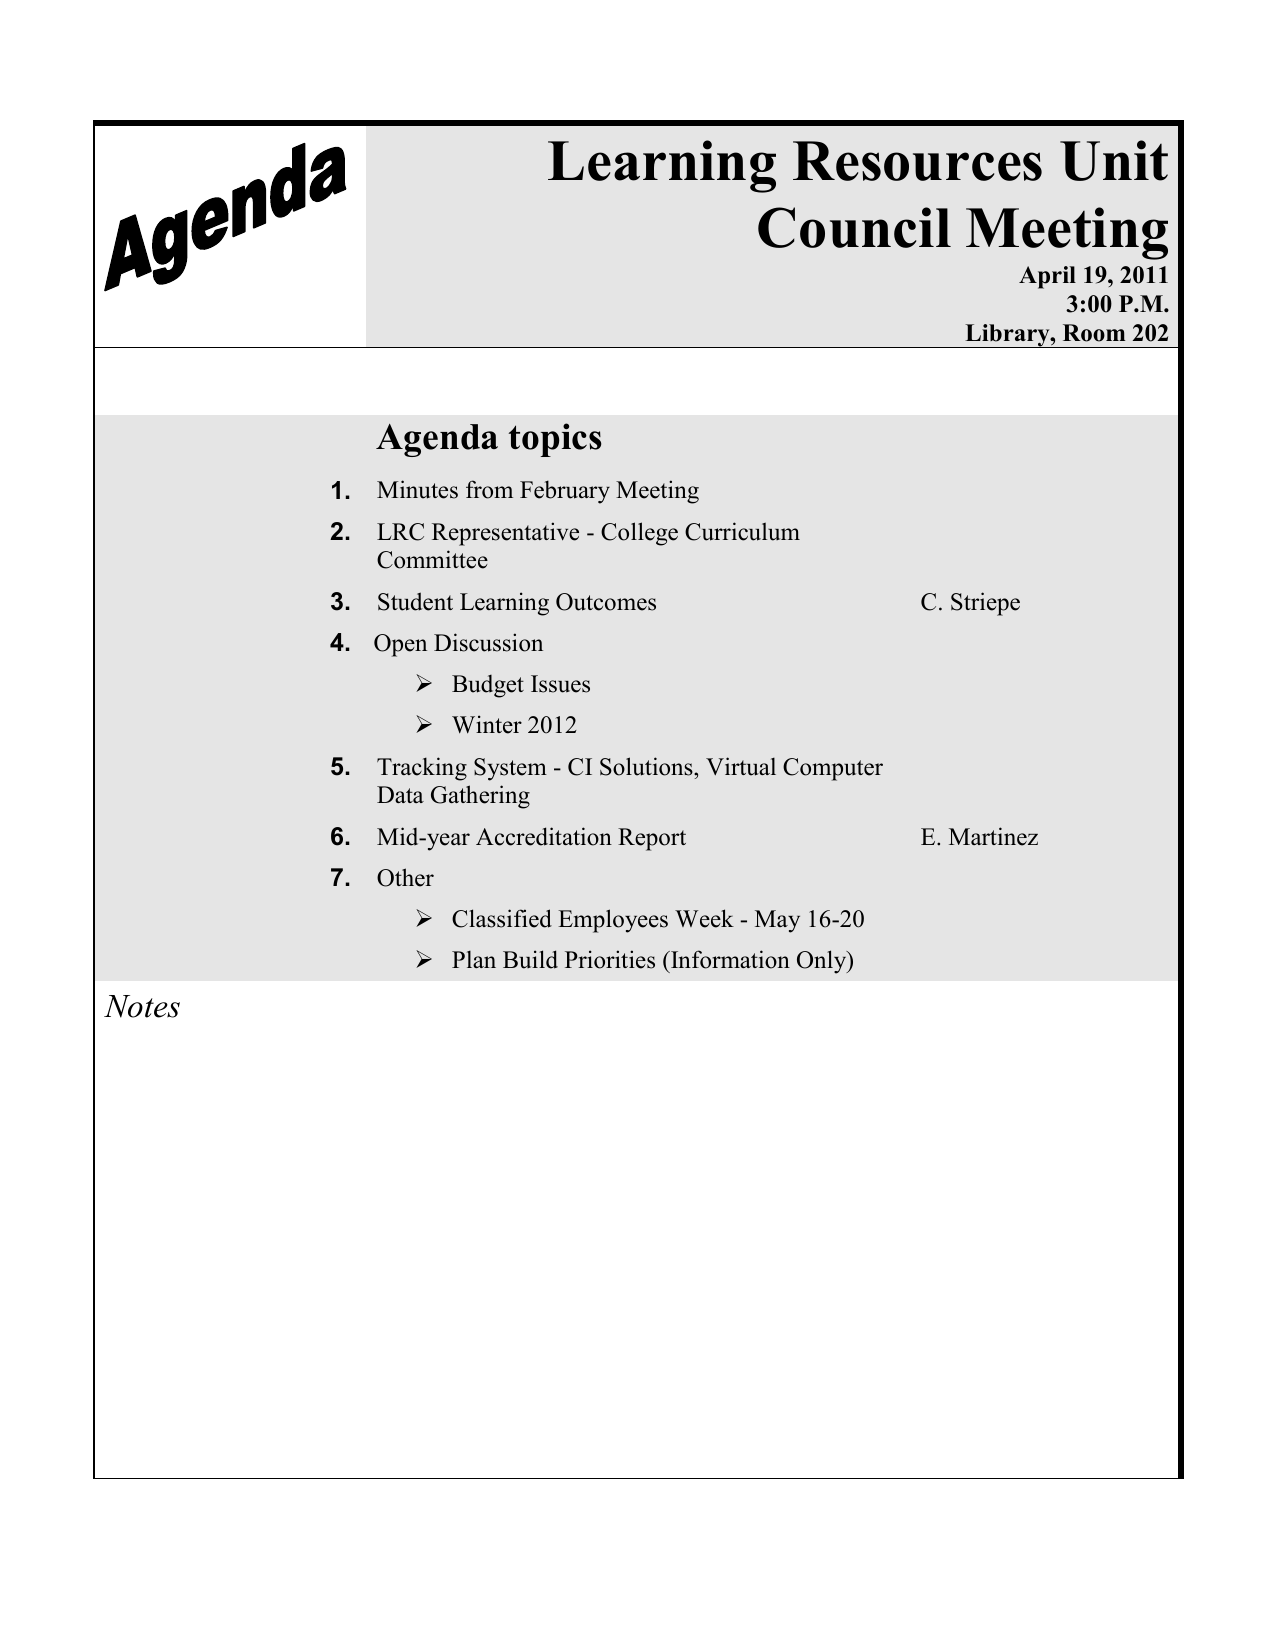 Unit Based Council Meeting Agenda Template